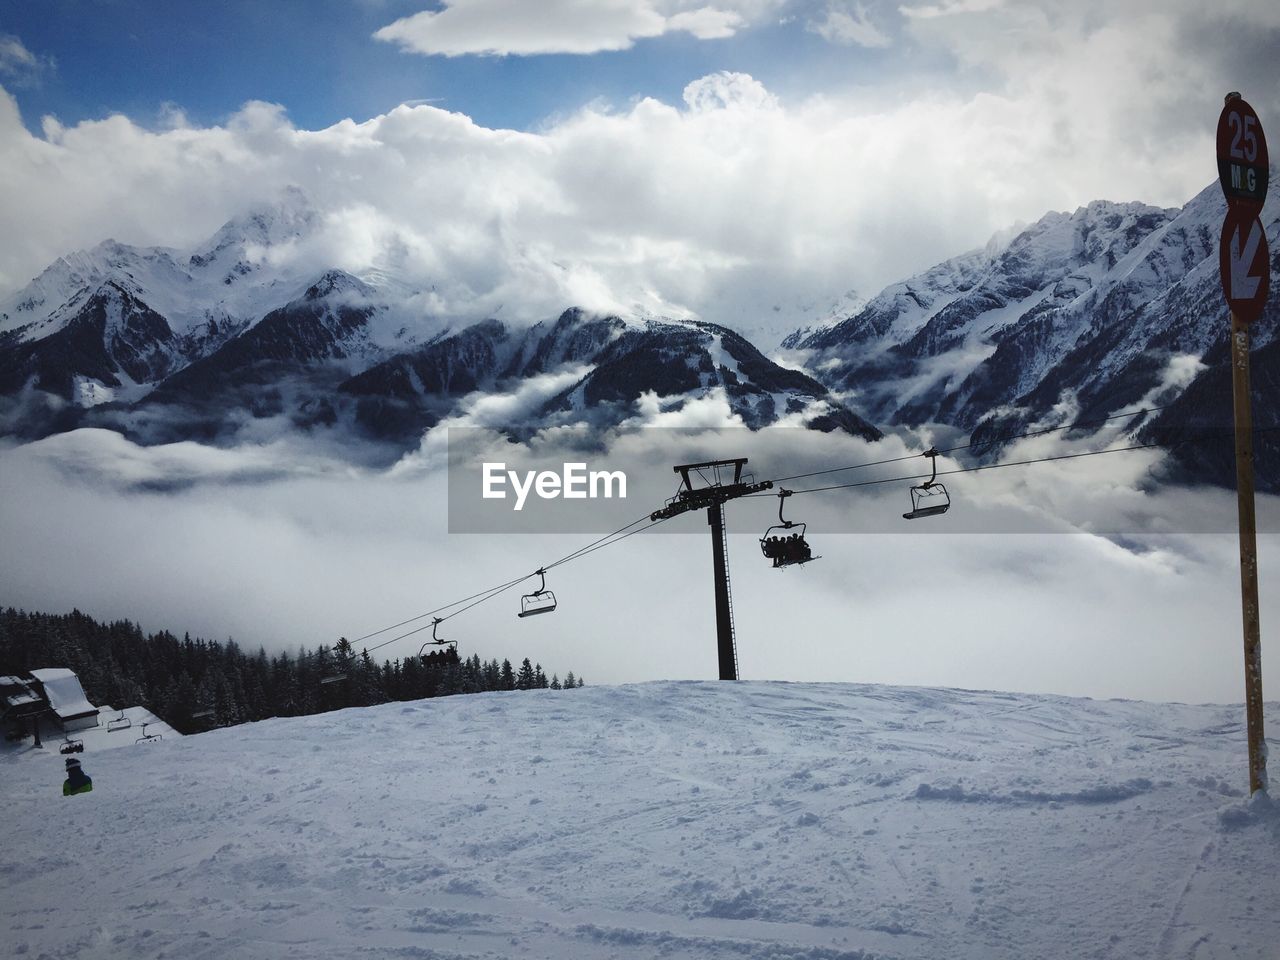 Ski lift over snowy hill against snowcapped mountains and cloudy sky